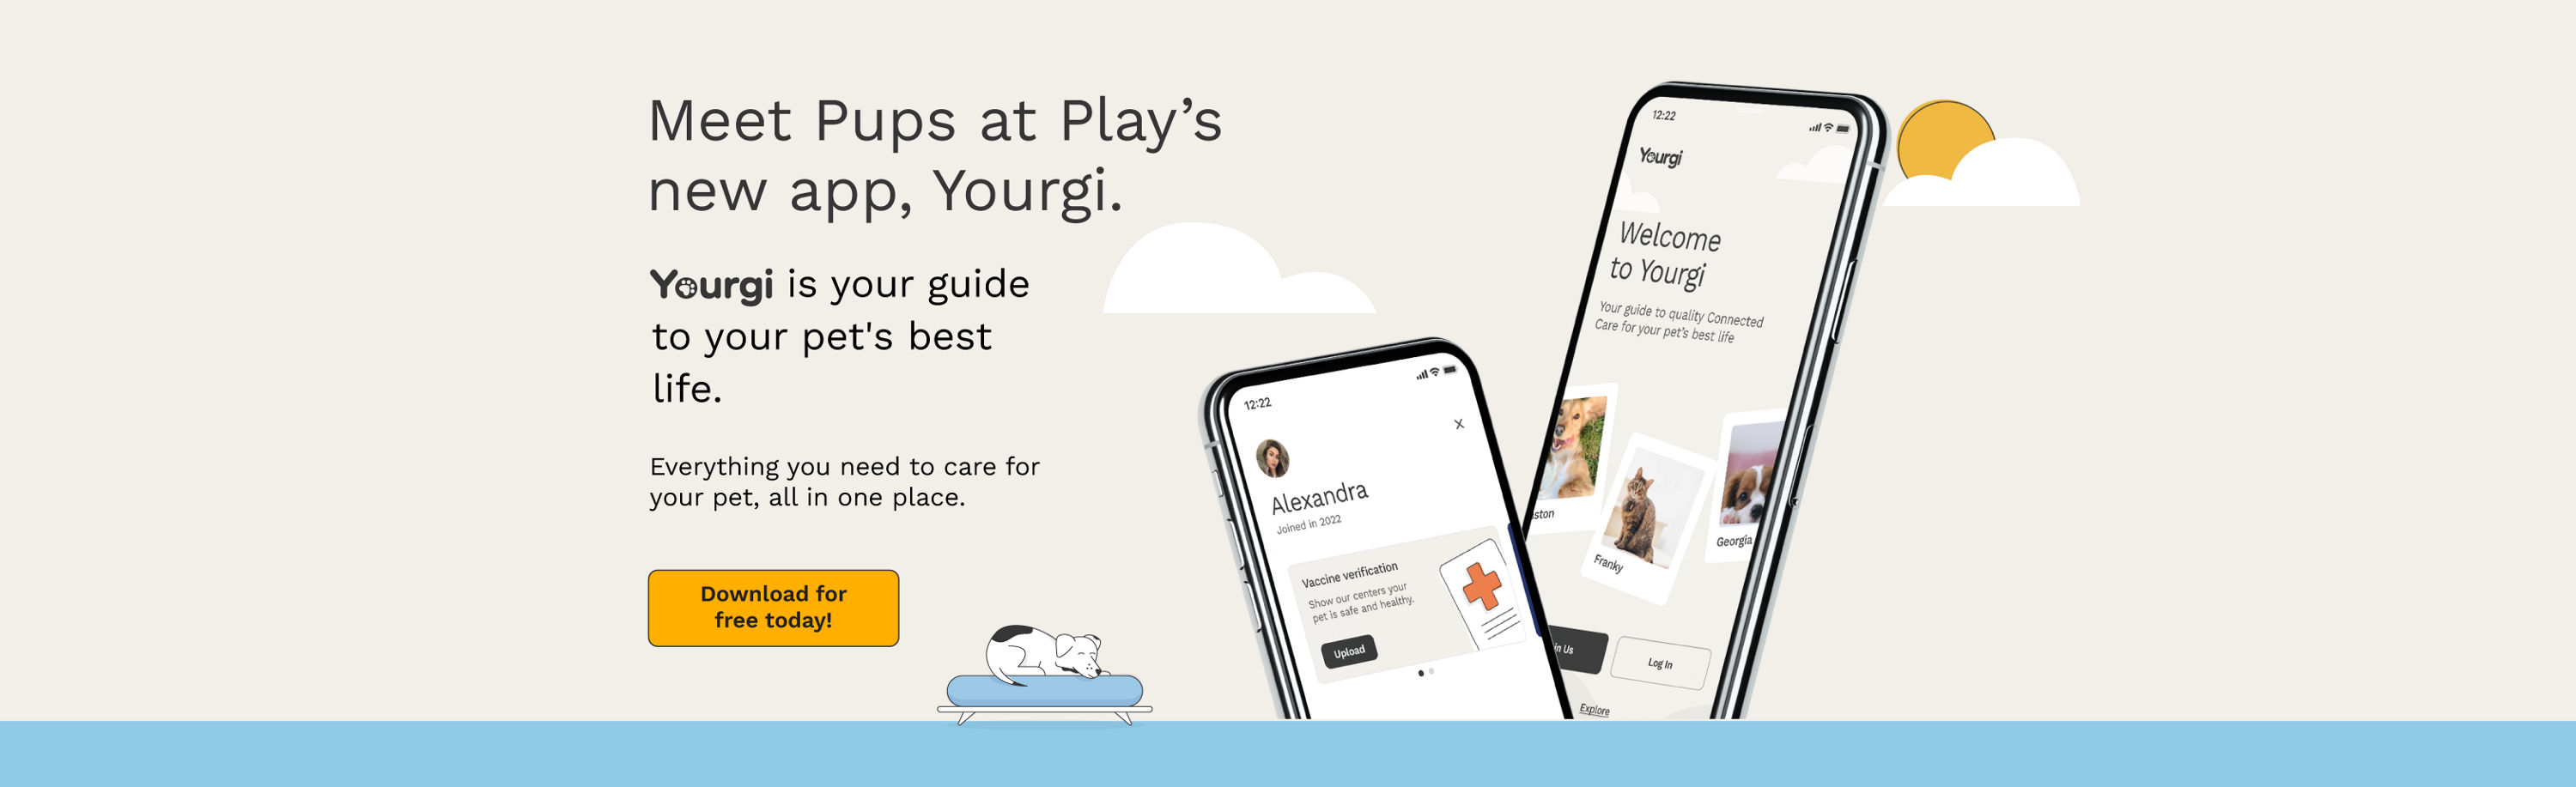 Meet Pup at Play's new app, Yourgi.